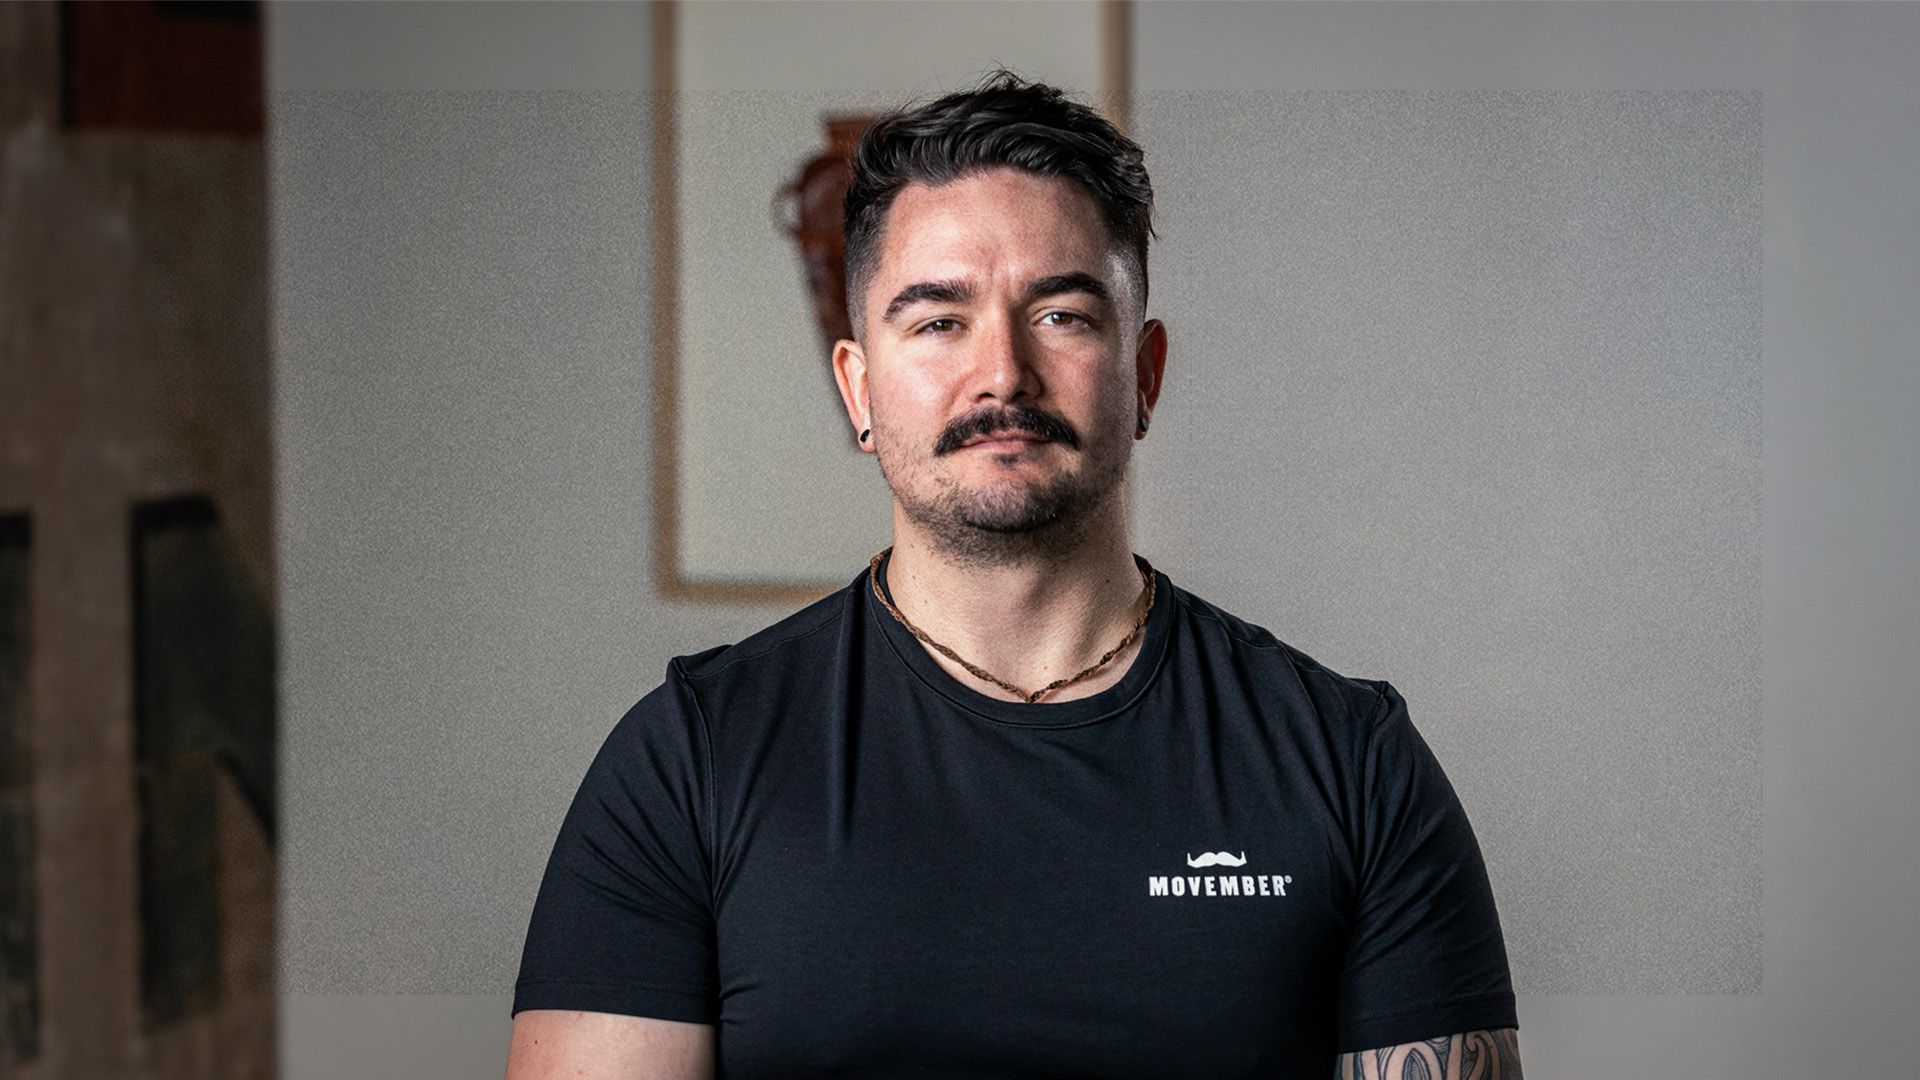 Man in movember t-shirt stares at camera stoically, within a room with grey walls